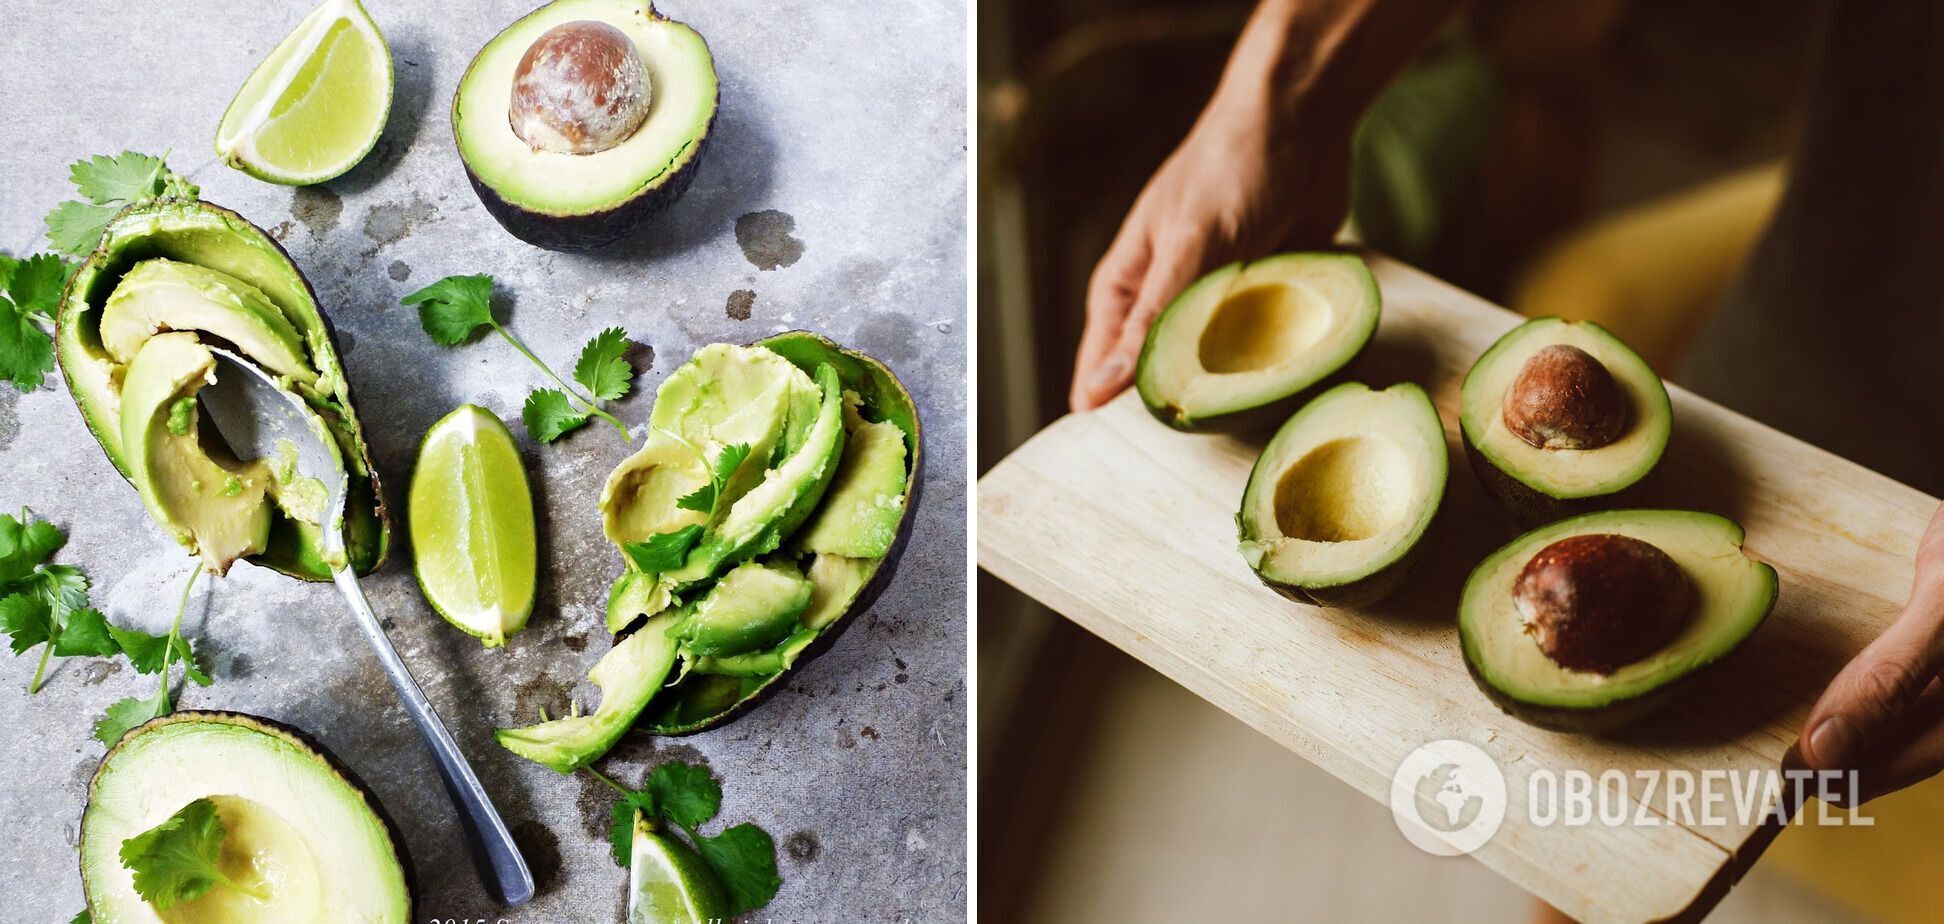 How to make avocado cream: an option for a simple and nutritious snack